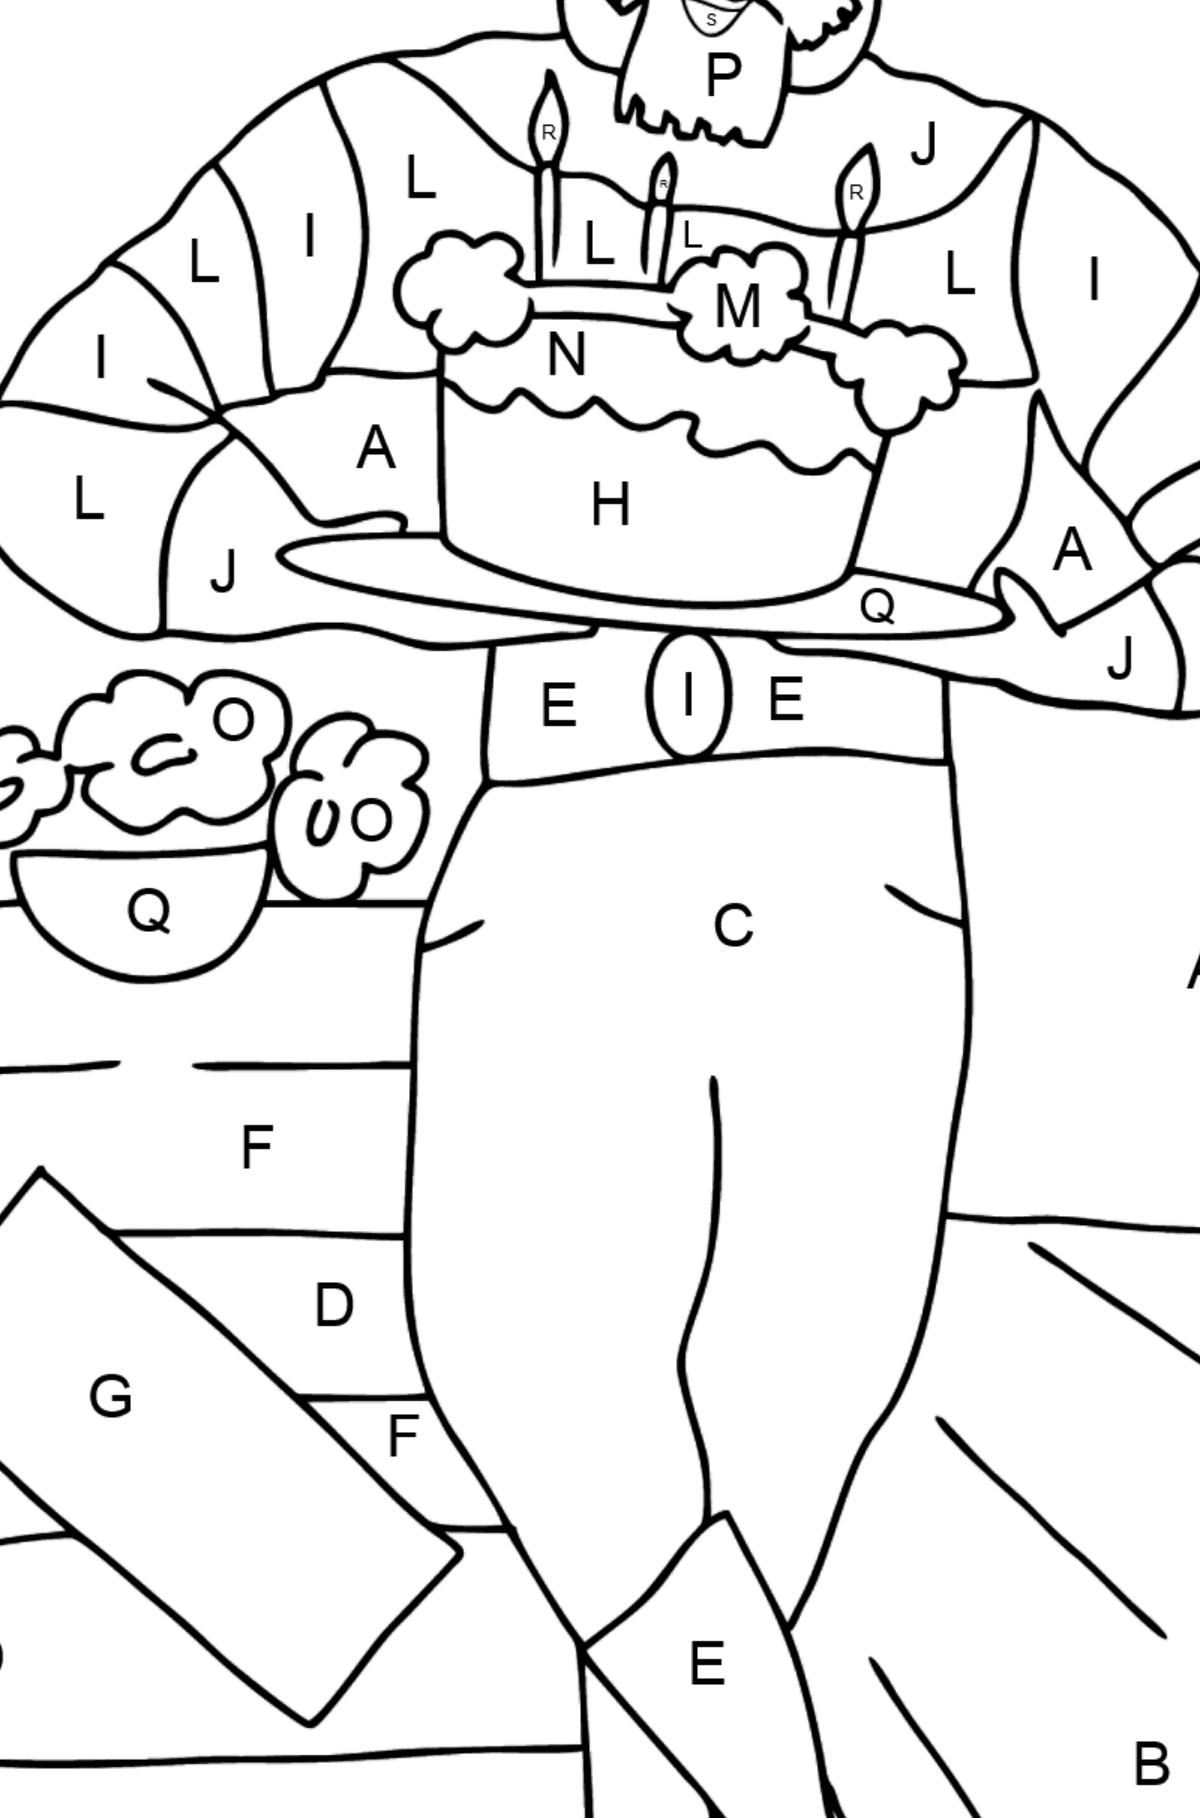 Coloring Page - A Pirate with Cake - Coloring by Letters for Kids